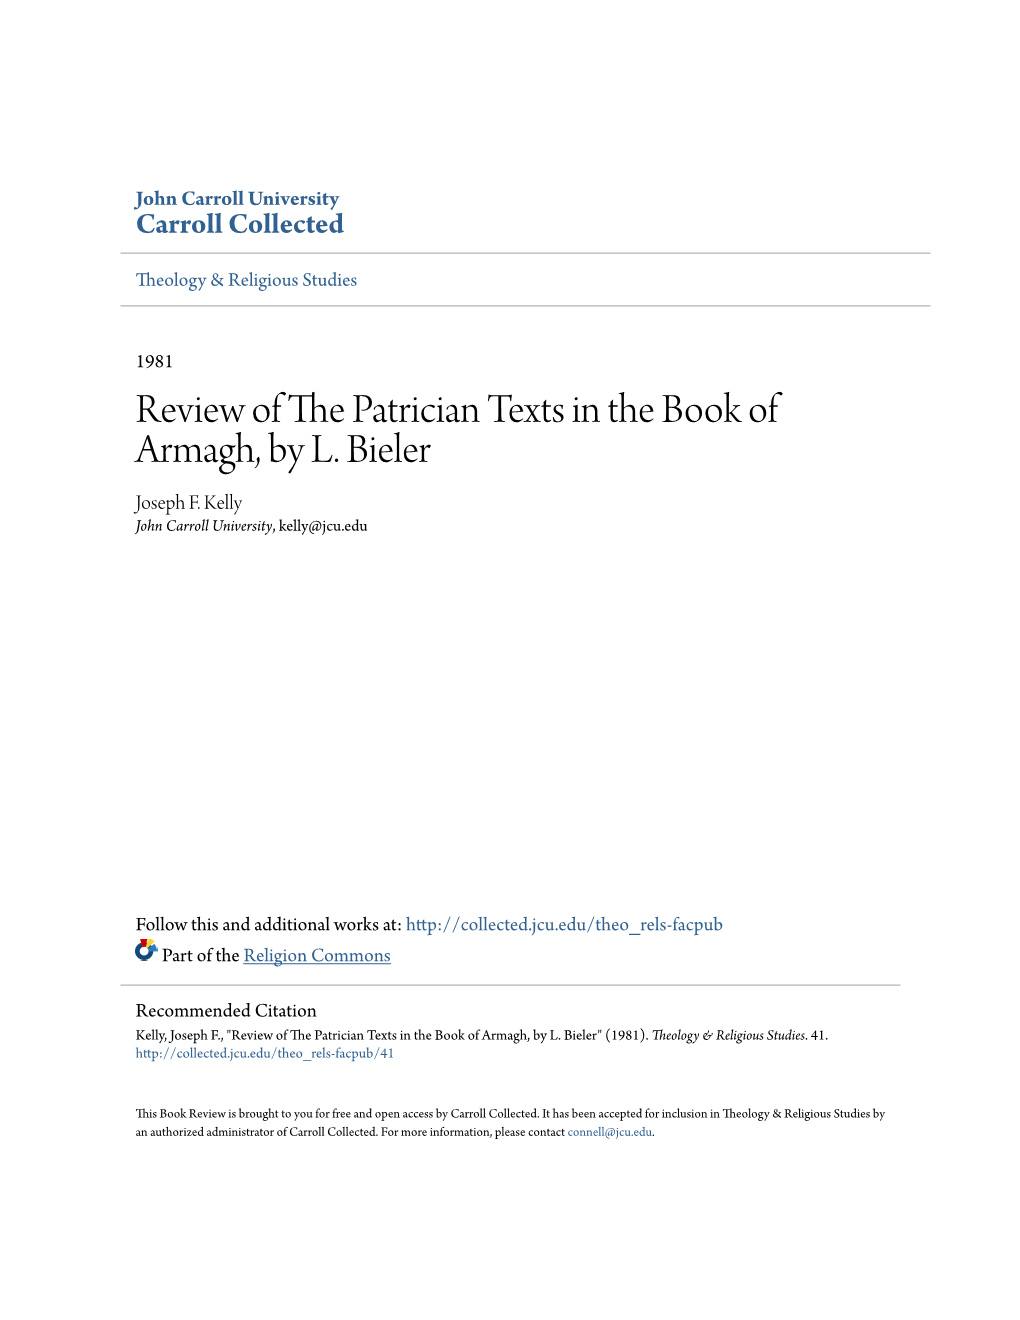 Review of the Patrician Texts in the Book of Armagh, by L. Bieler